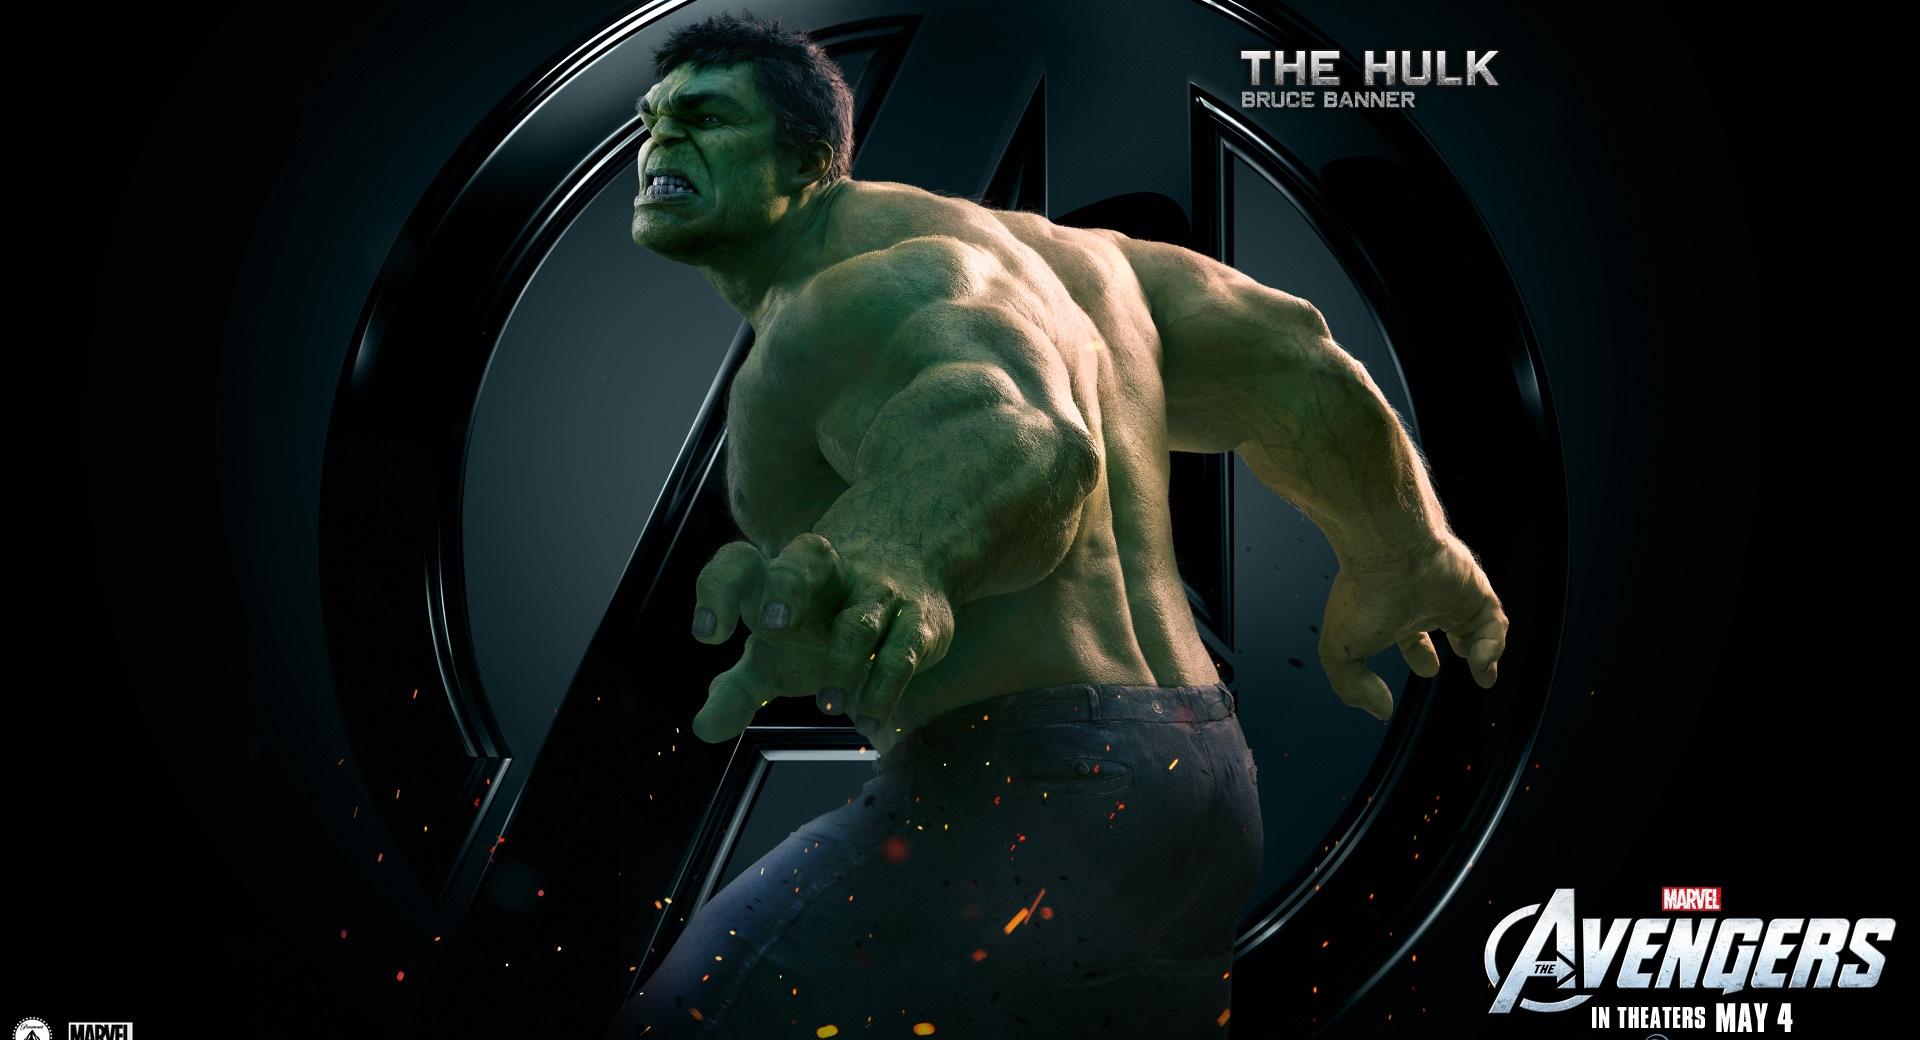 The Avengers The Hulk wallpapers HD quality